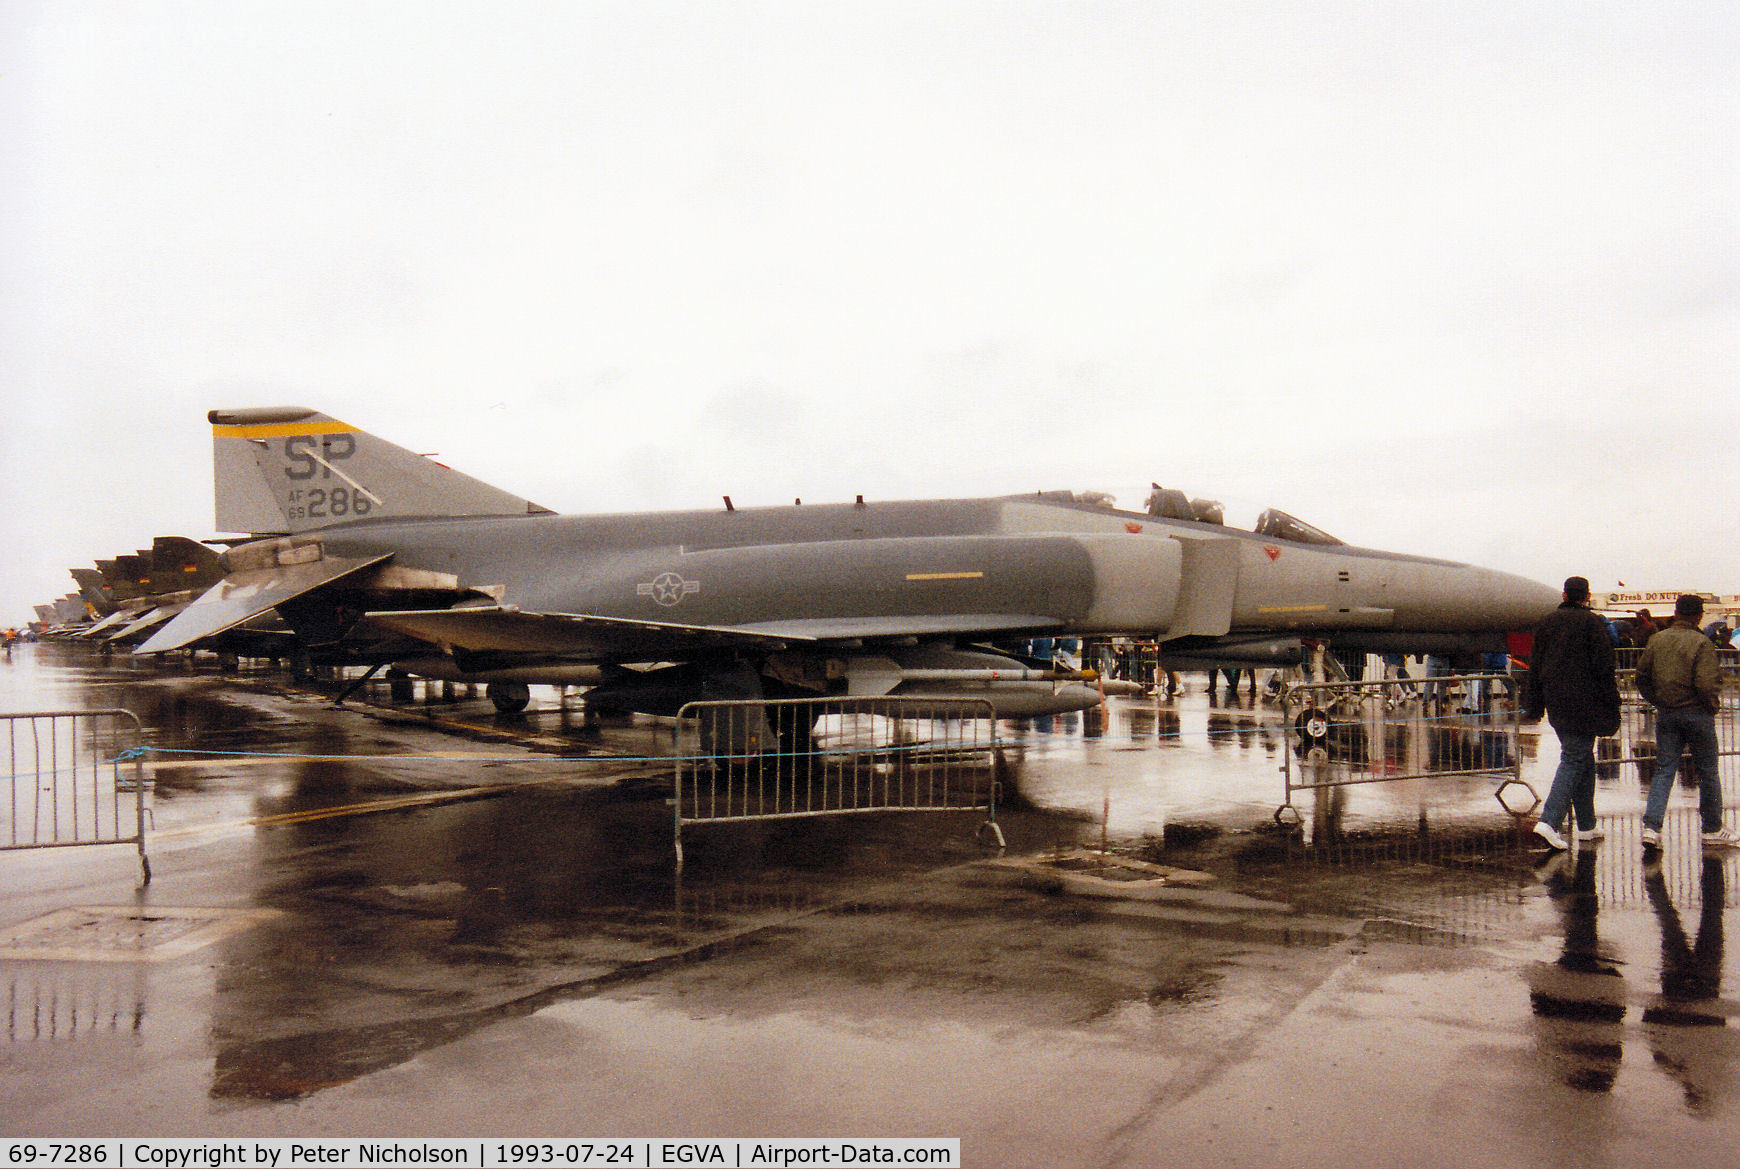 69-7286, 1969 McDonnell Douglas F-4G Phantom II C/N 3964, F-4G Phantom, callsign Rhino 01, of 81st Fighter Squadron/52nd Fighter Wing at Spangdahlem on display at the 1993 Intnl Air Tattoo at RAF Fairford.